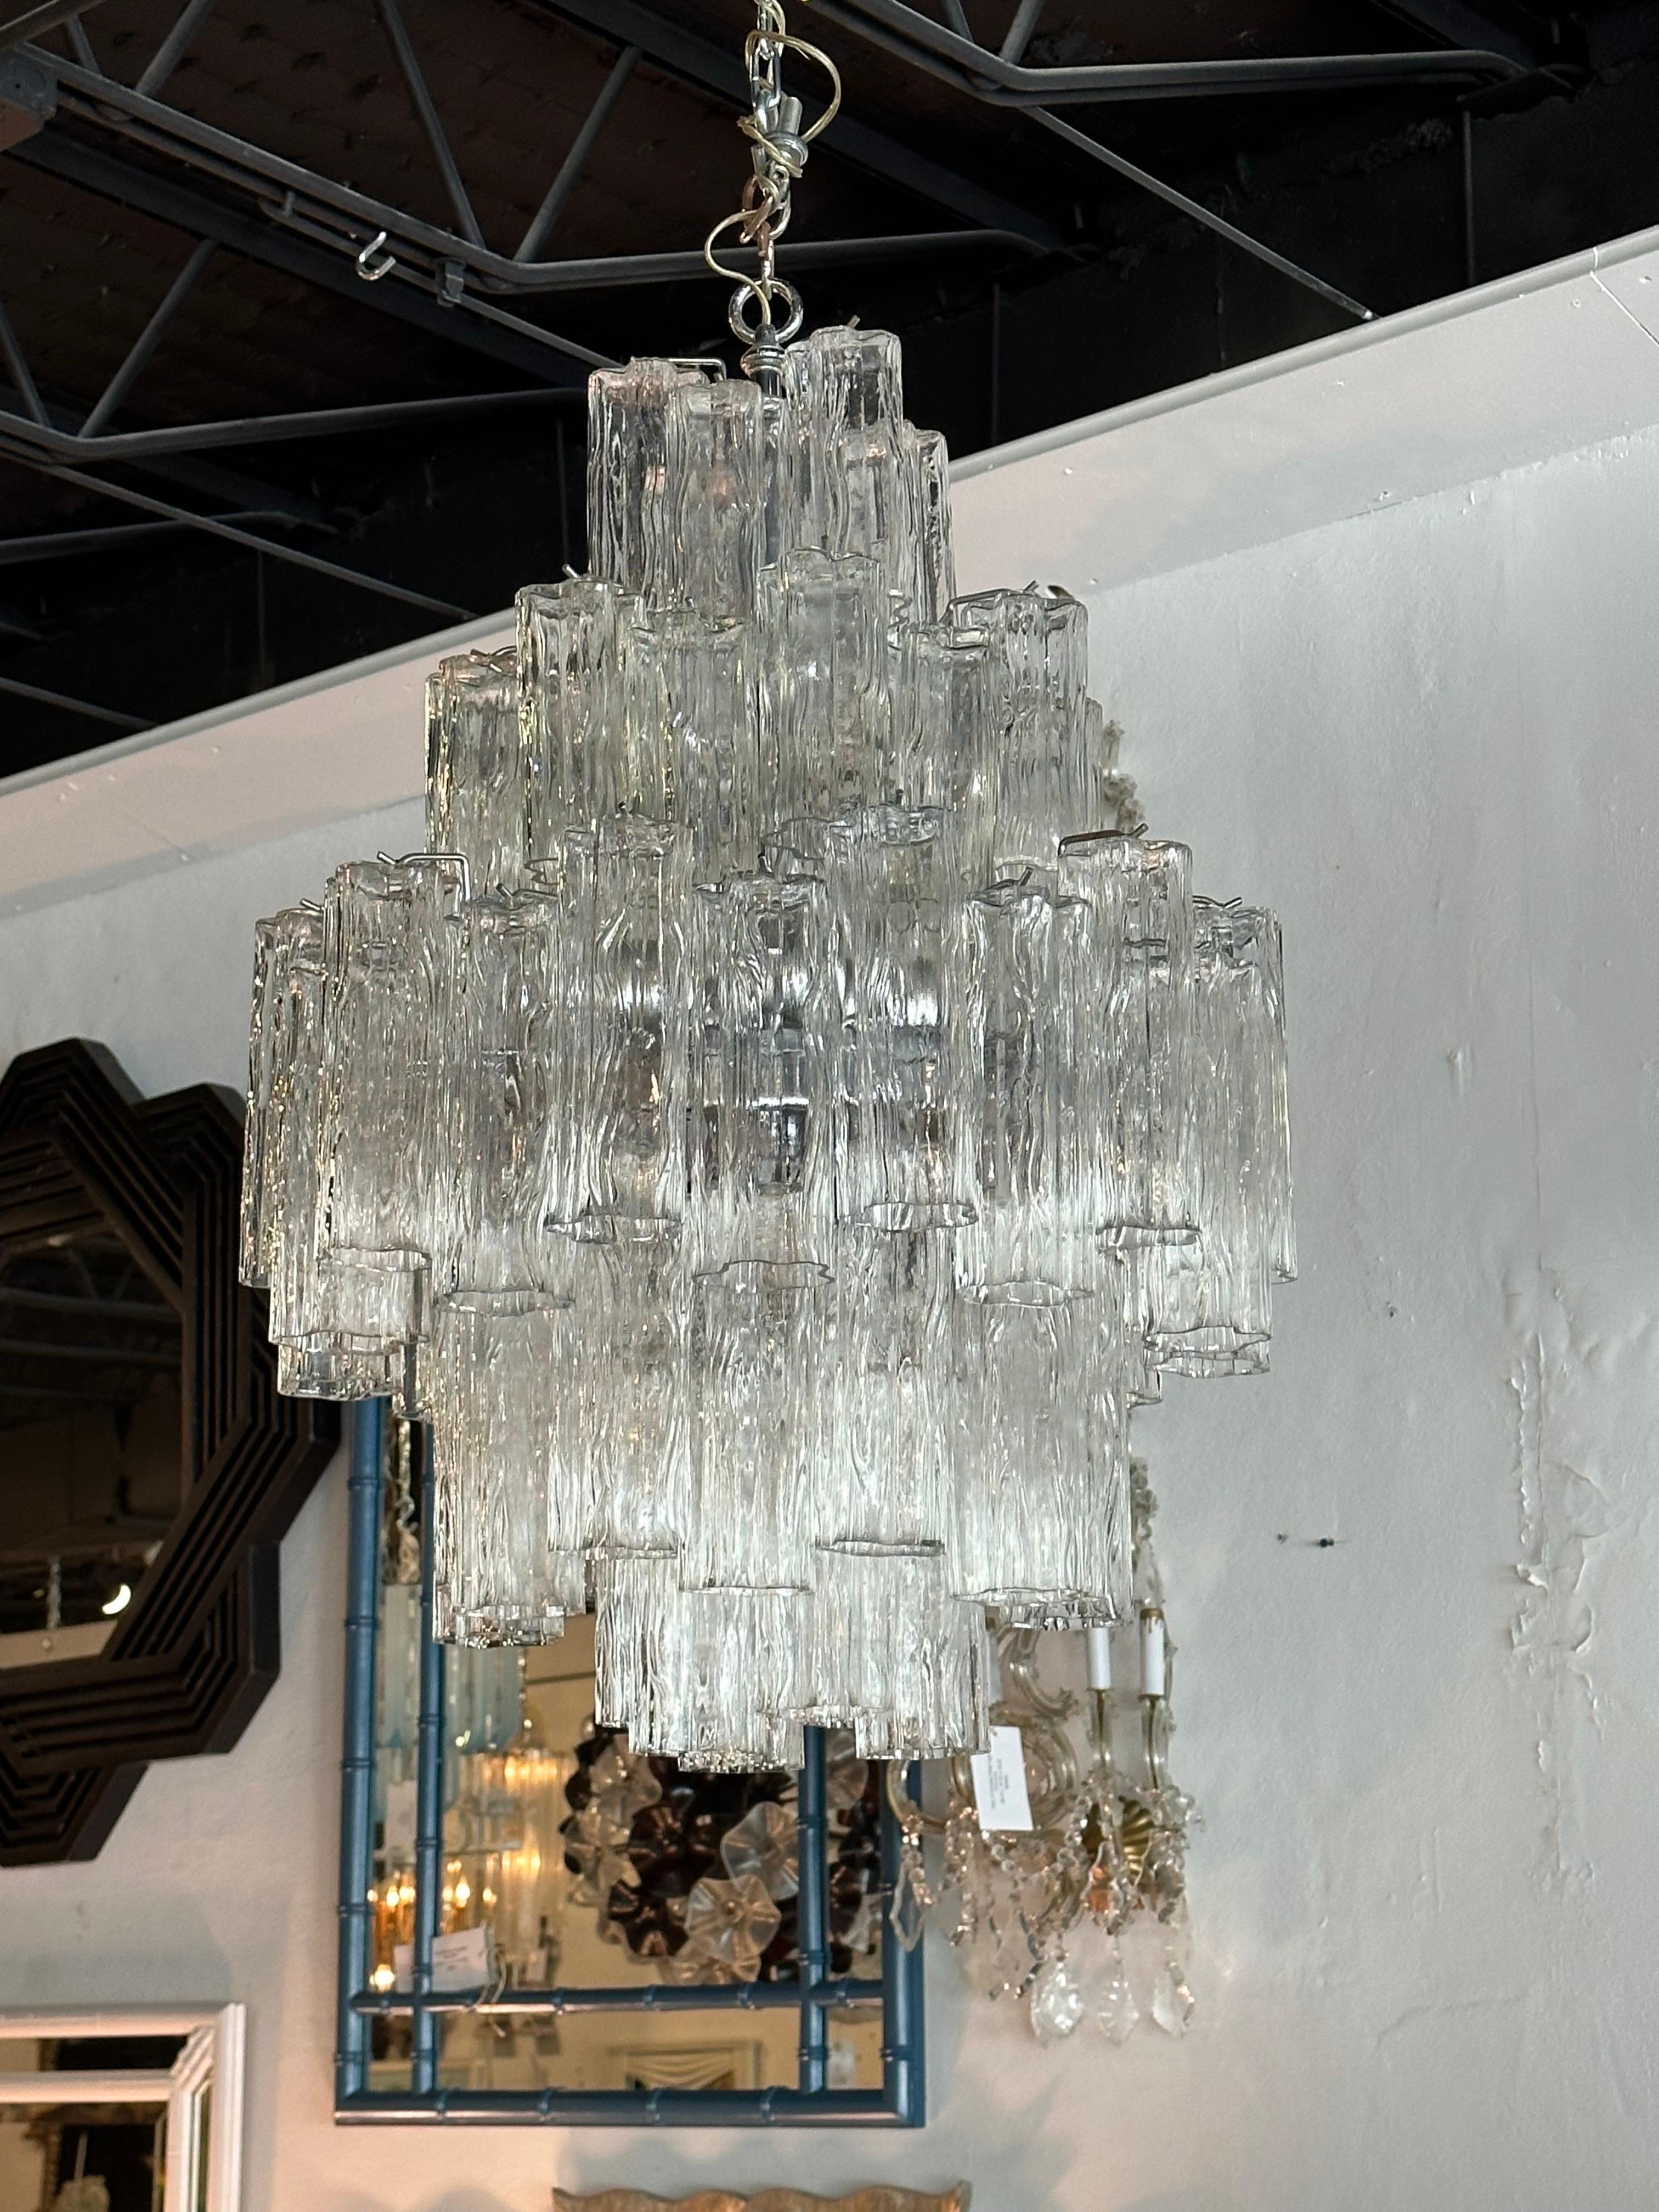 Vintage 1970s Murano Venini glass chandelier. 10 lightbulbs. 5 tiers of glass. 62 pieces of glass. No broken or chipped glass. Chrome cage with ceiling cap. Tested, working order. Actually size of chandelier, which does not include chain length is